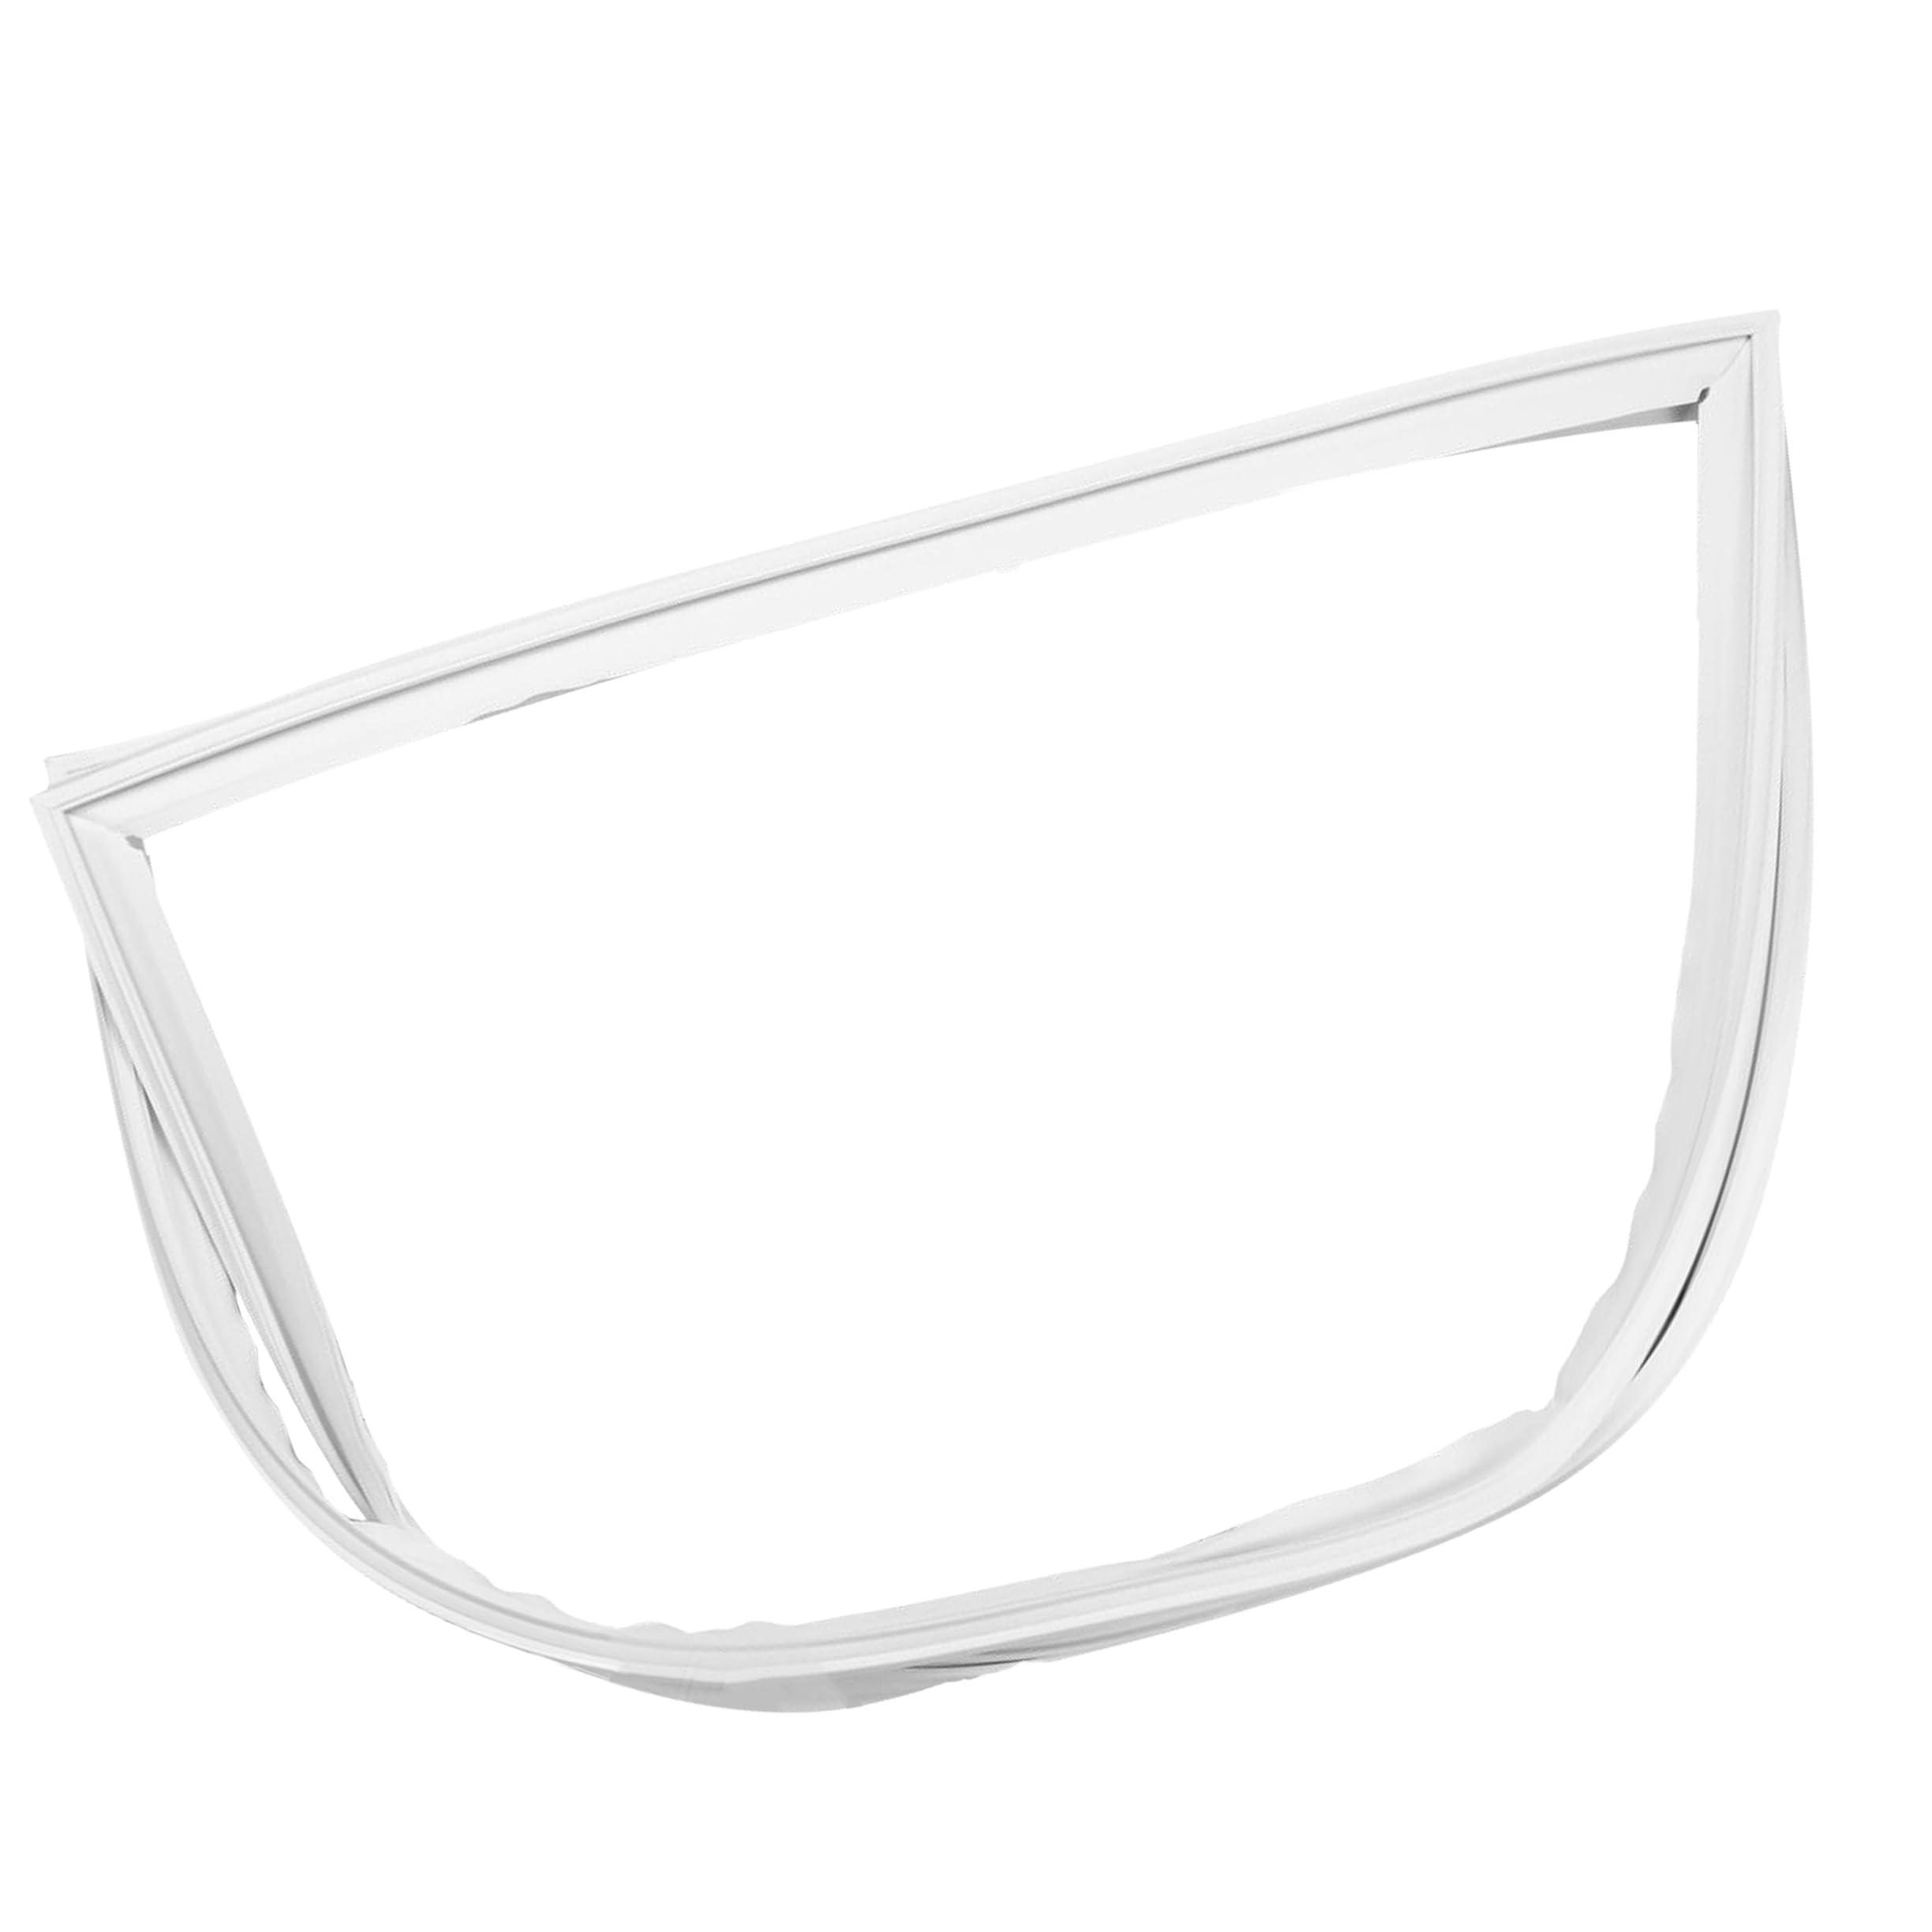 Whole Parts Refrigerator Freezer Door Gasket (White Color) Part# 5304507202 - Replacement & Compatible with Some Gibson, Frigidaire, Kenmore and White Westinghouse Refrigerators